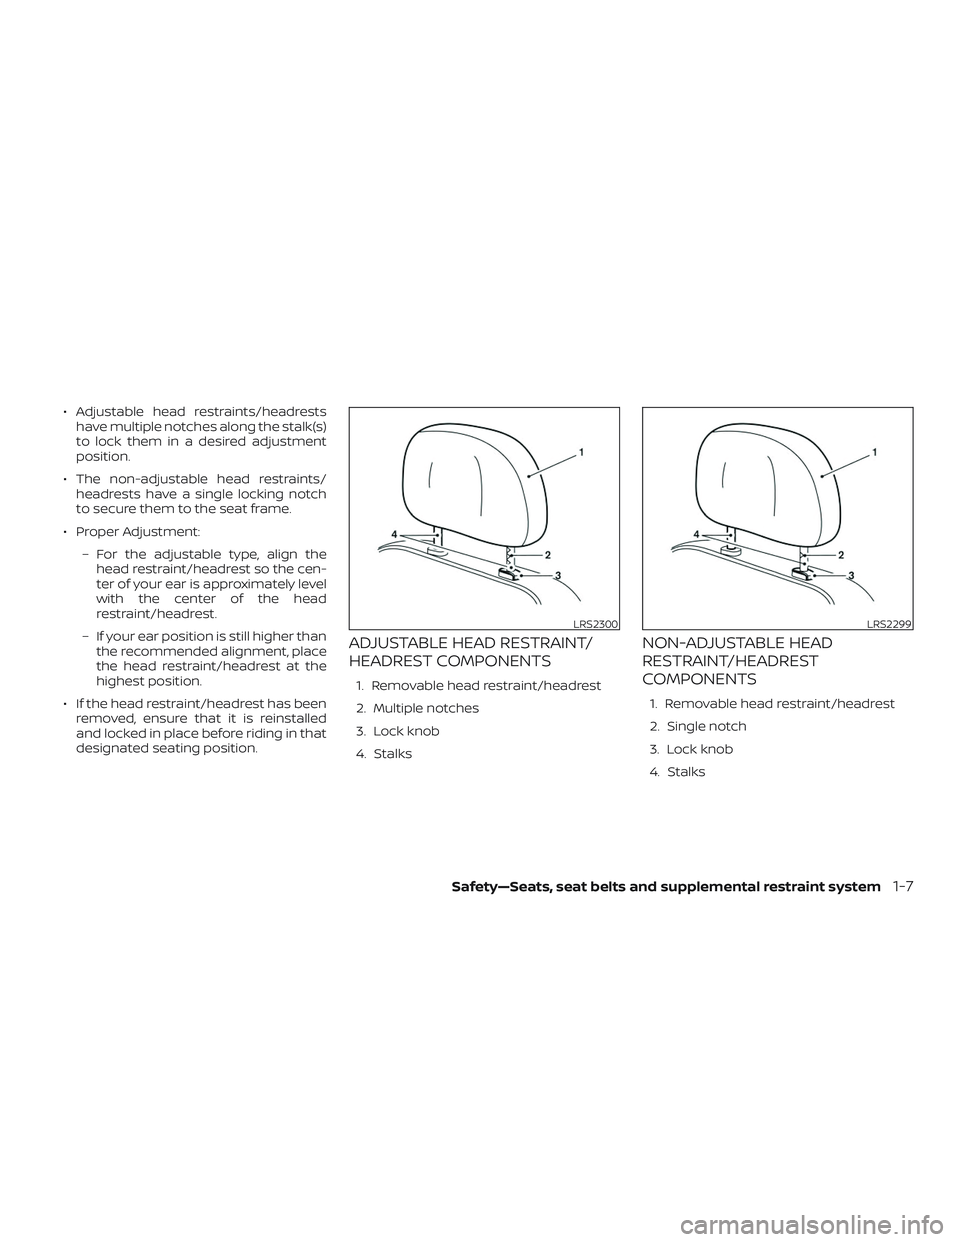 NISSAN MICRA 2023  Owners Manual ∙ Adjustable head restraints/headrestshave multiple notches along the stalk(s)
to lock them in a desired adjustment
position.
∙ The non-adjustable head restraints/ headrests have a single locking 